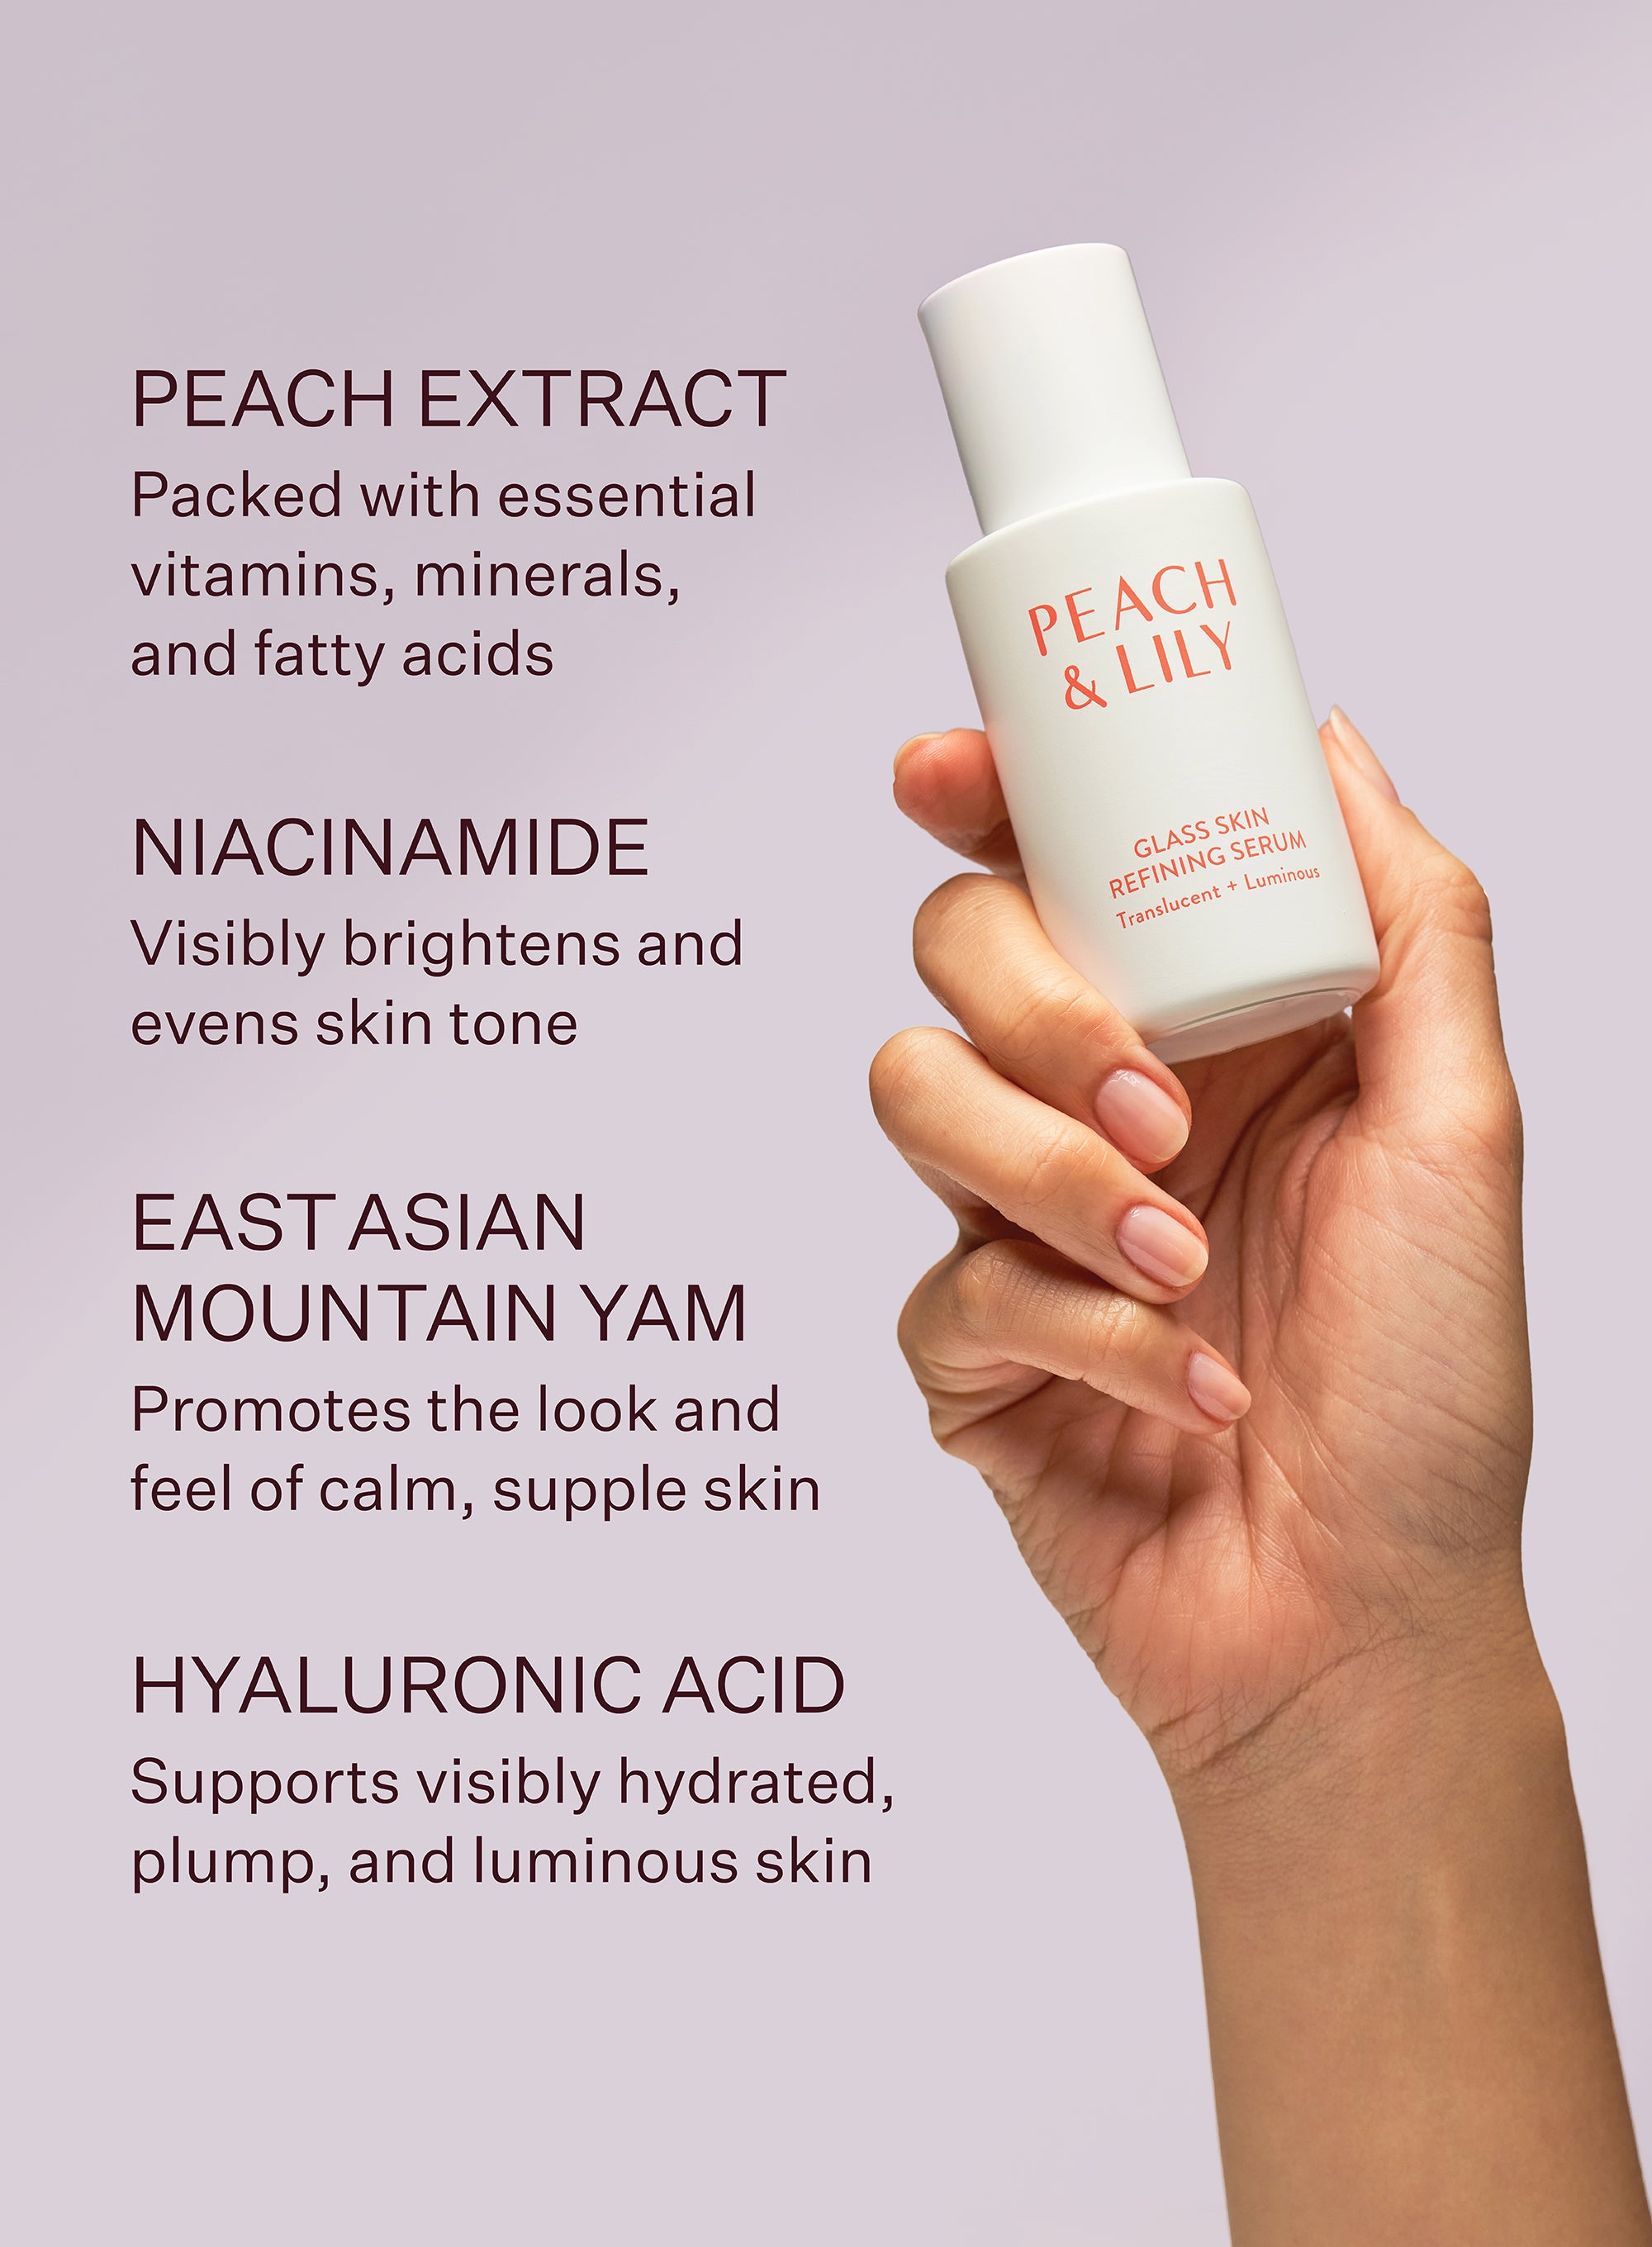 An Editor Reviews The New Peach & Lily Glass Skin Refining Serum -  Coveteur: Inside Closets, Fashion, Beauty, Health, and Travel